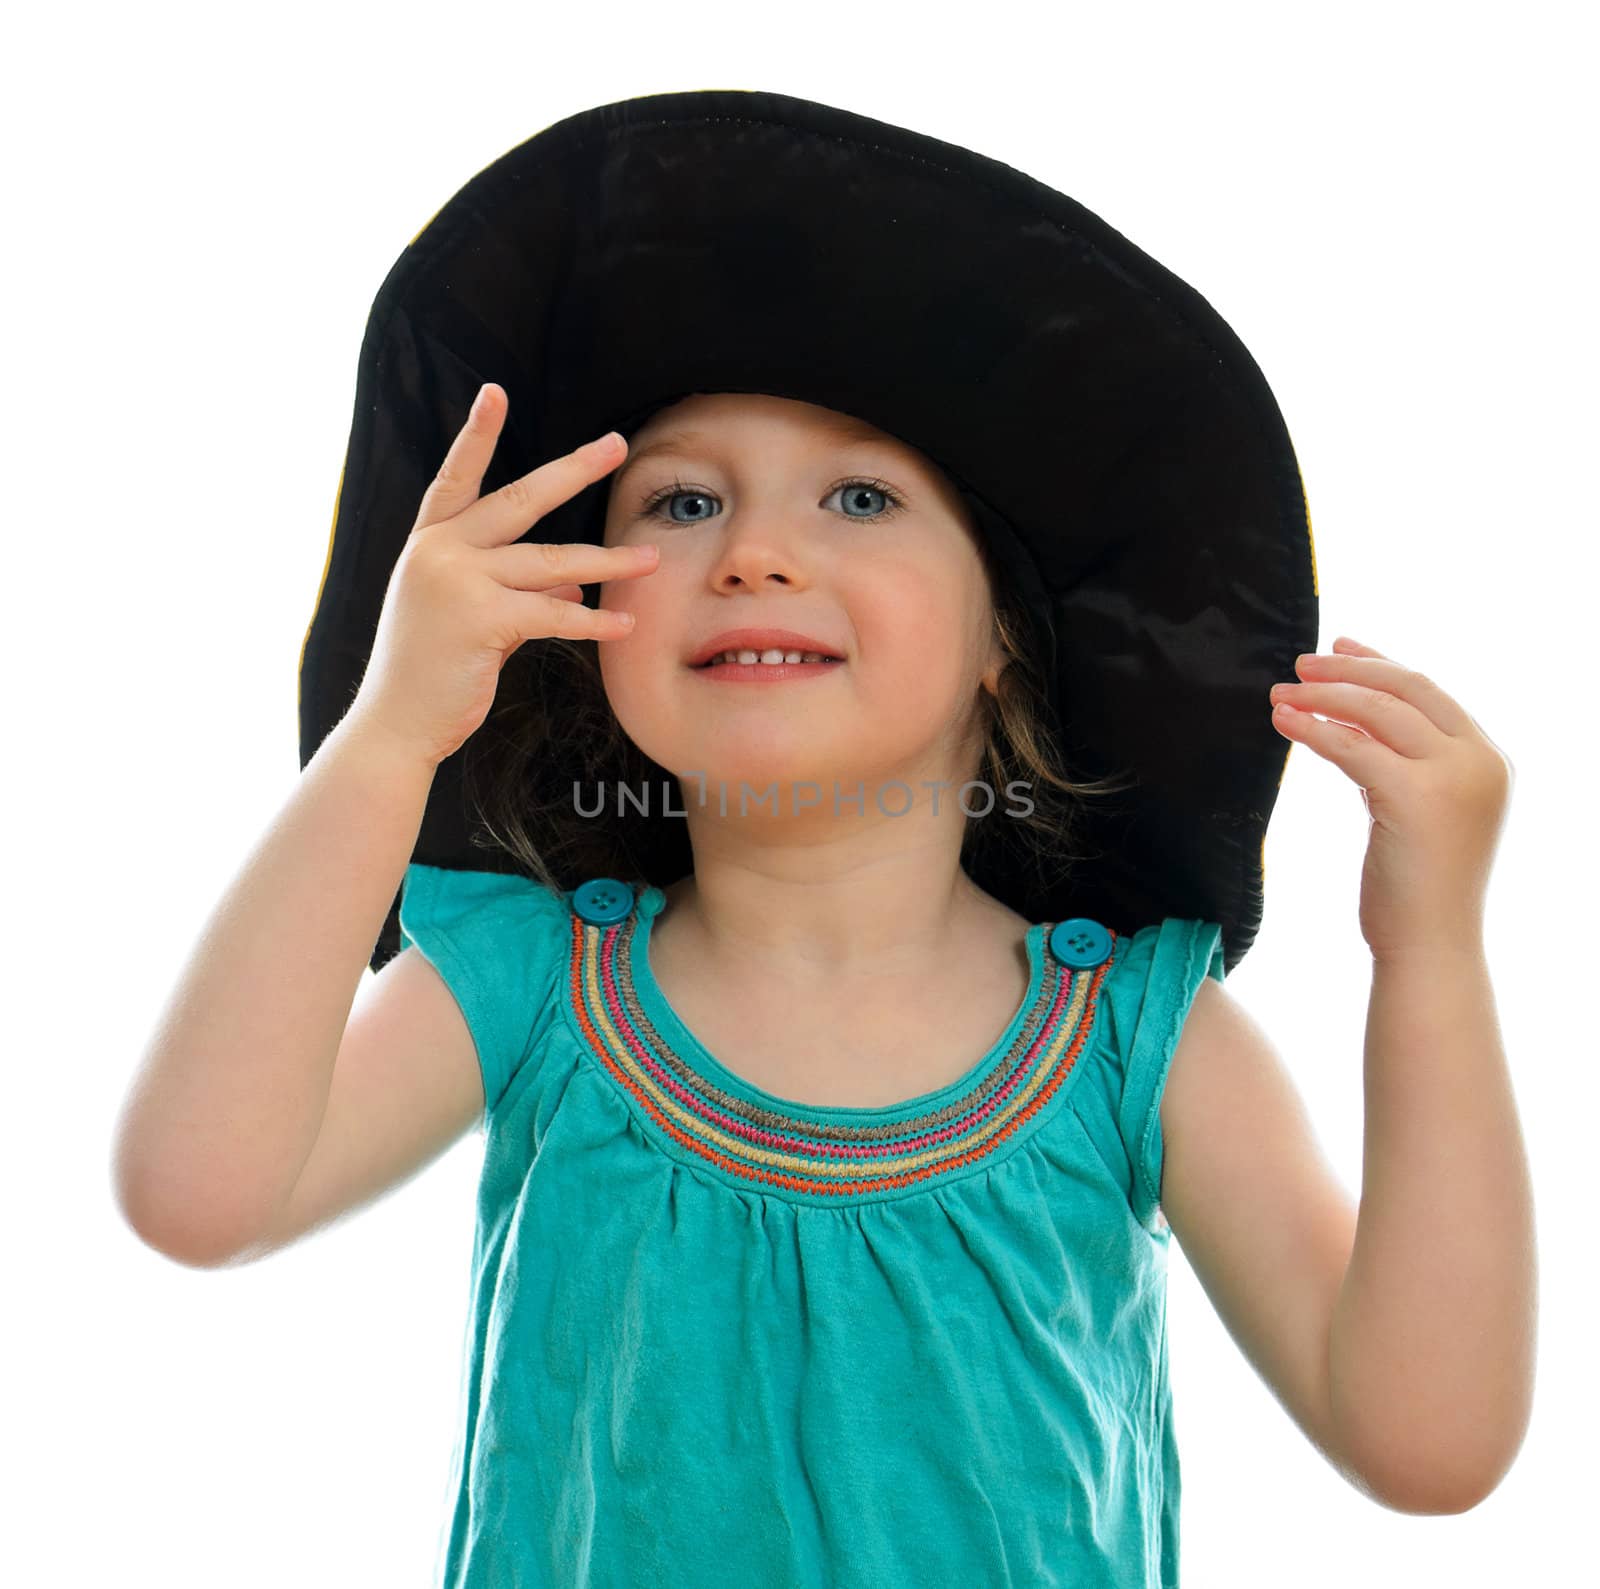 Smiling little girl in hat, isolated on white